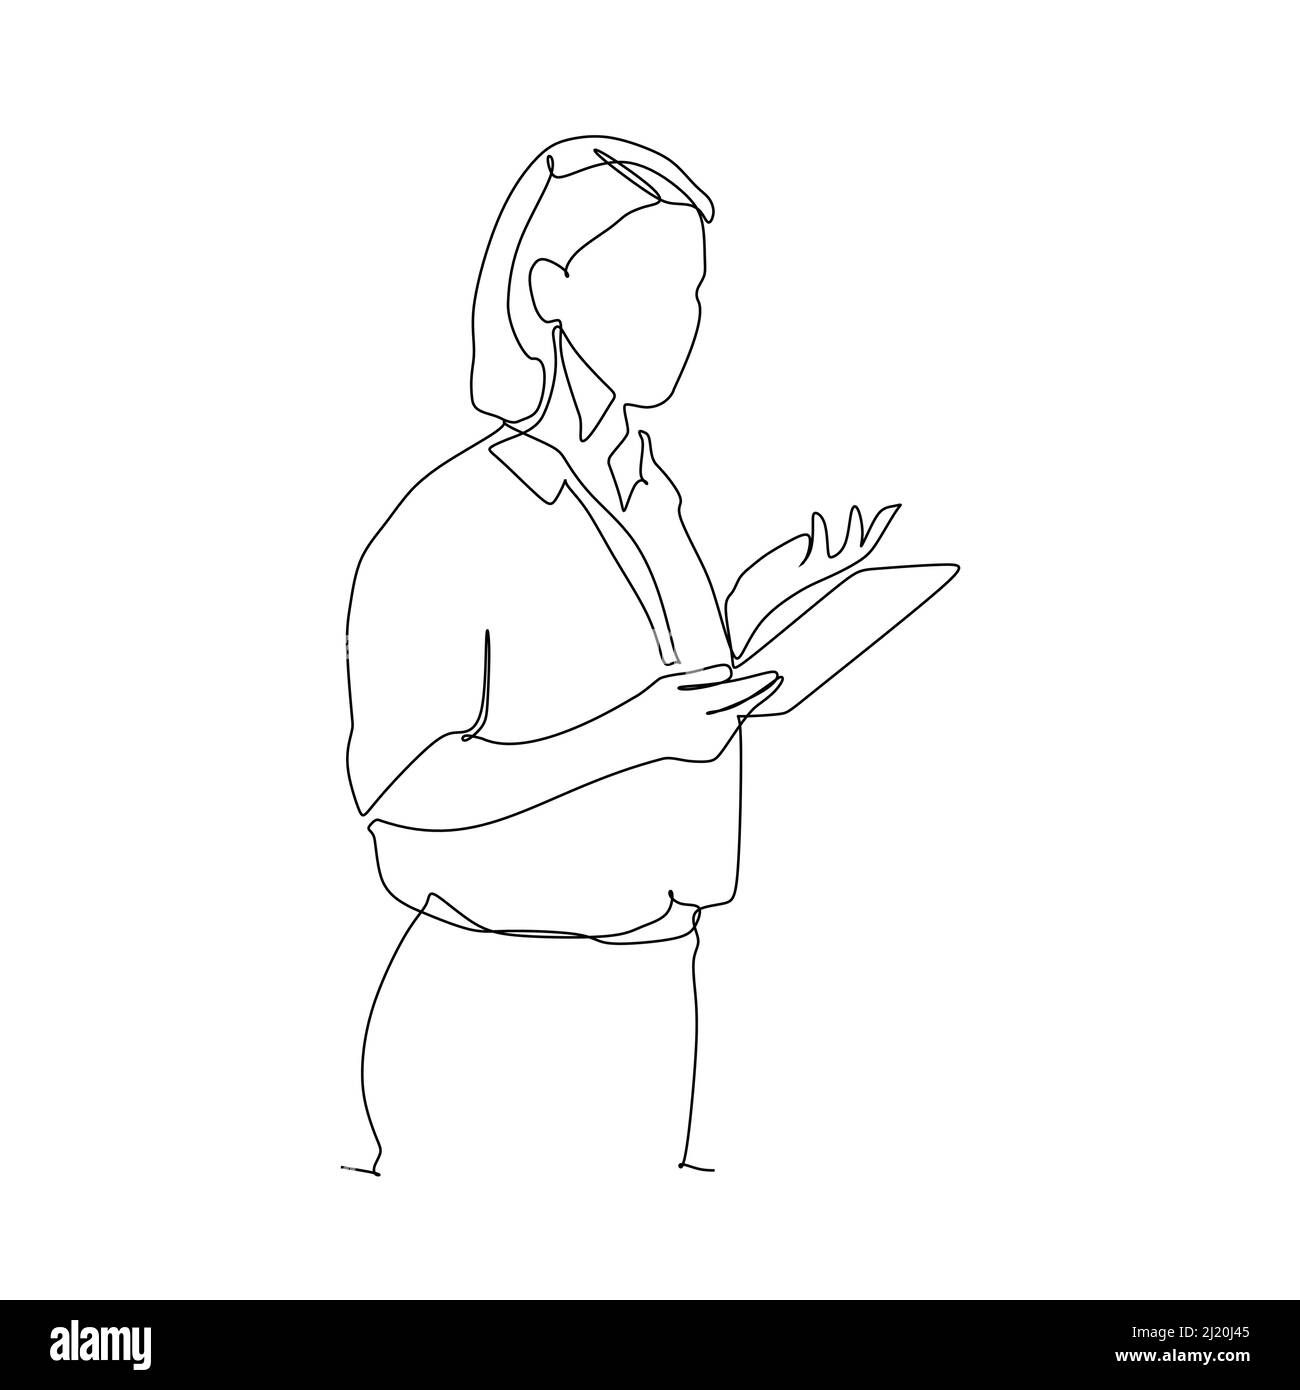 Single Line Drawing Of A Female Teacher Hand Drawn Style Design For Educational Concept Stock 